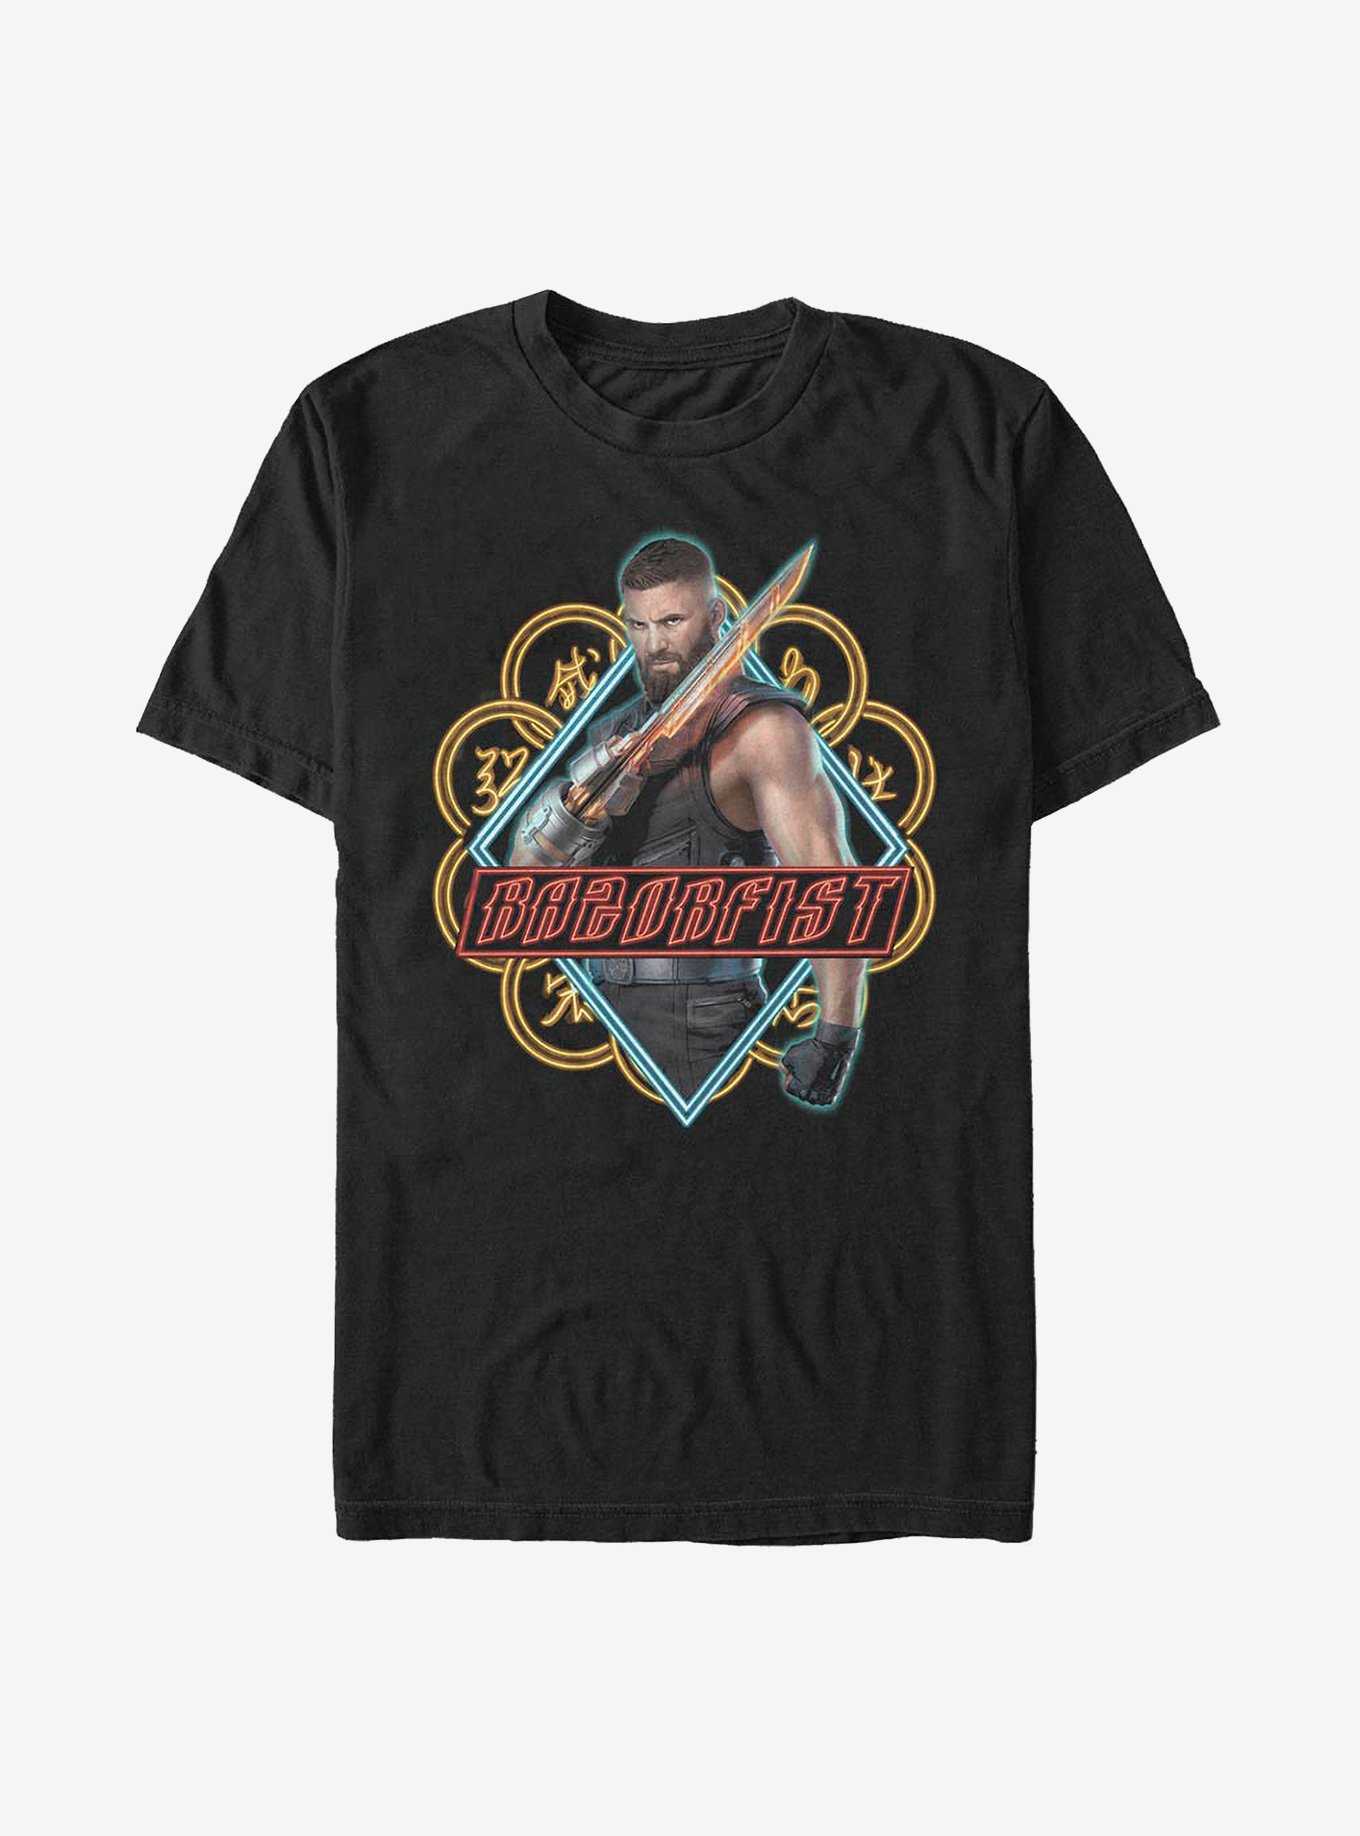 Marvel Shang-Chi And The Legend Of The Ten Rings Razorfist Pose T-Shirt, , hi-res